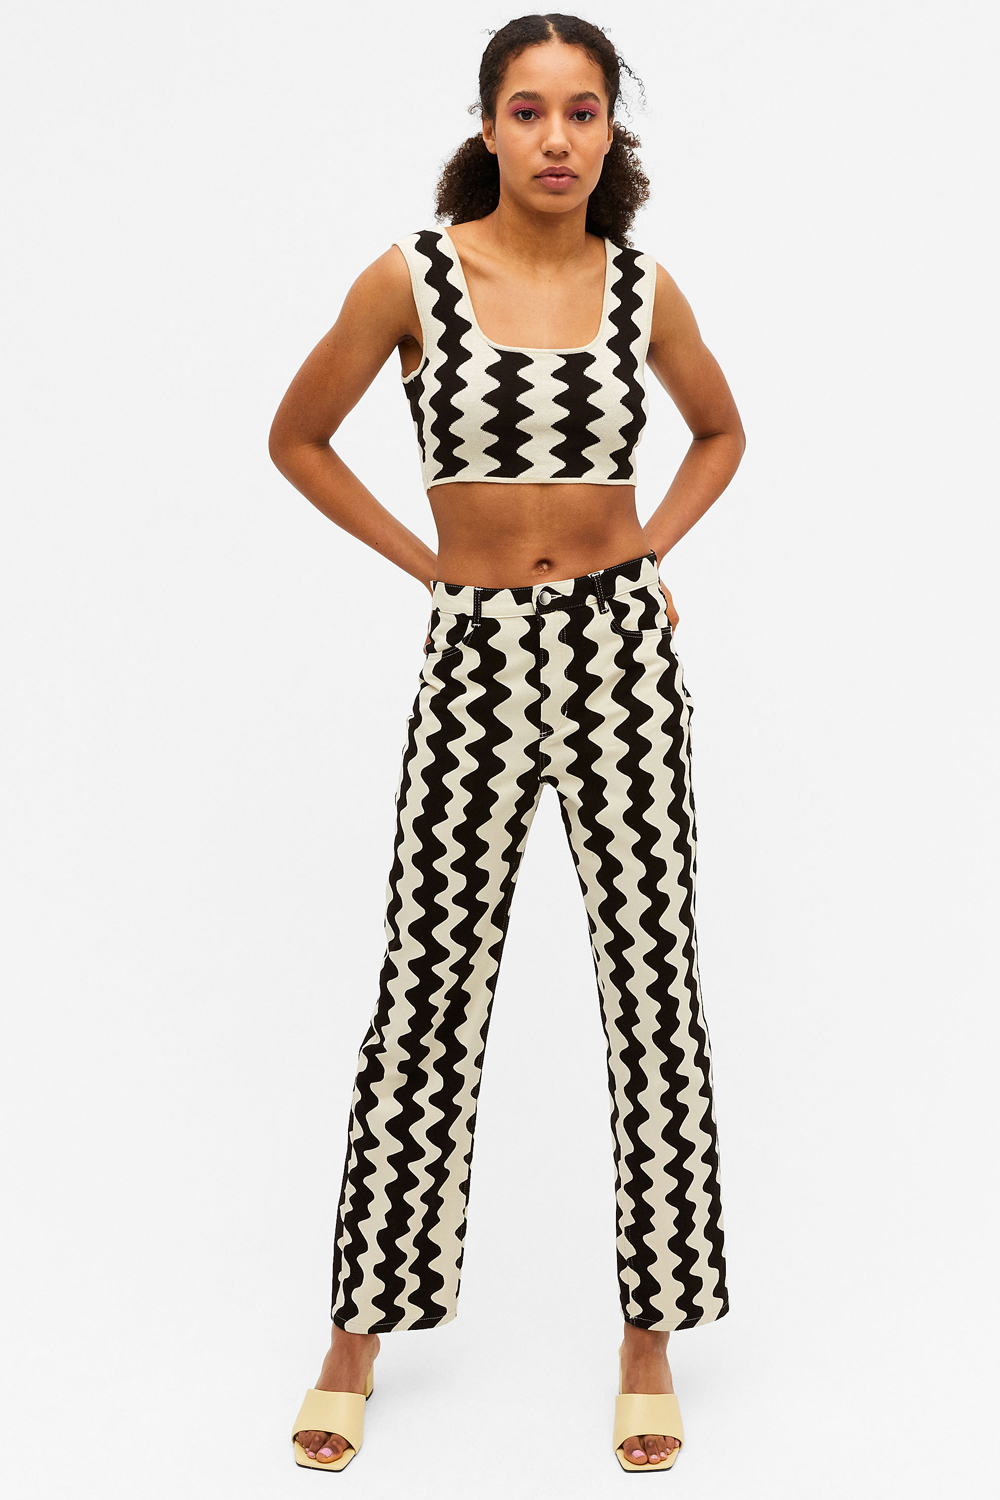 best printed jeans: monochrome wiggles at Monki